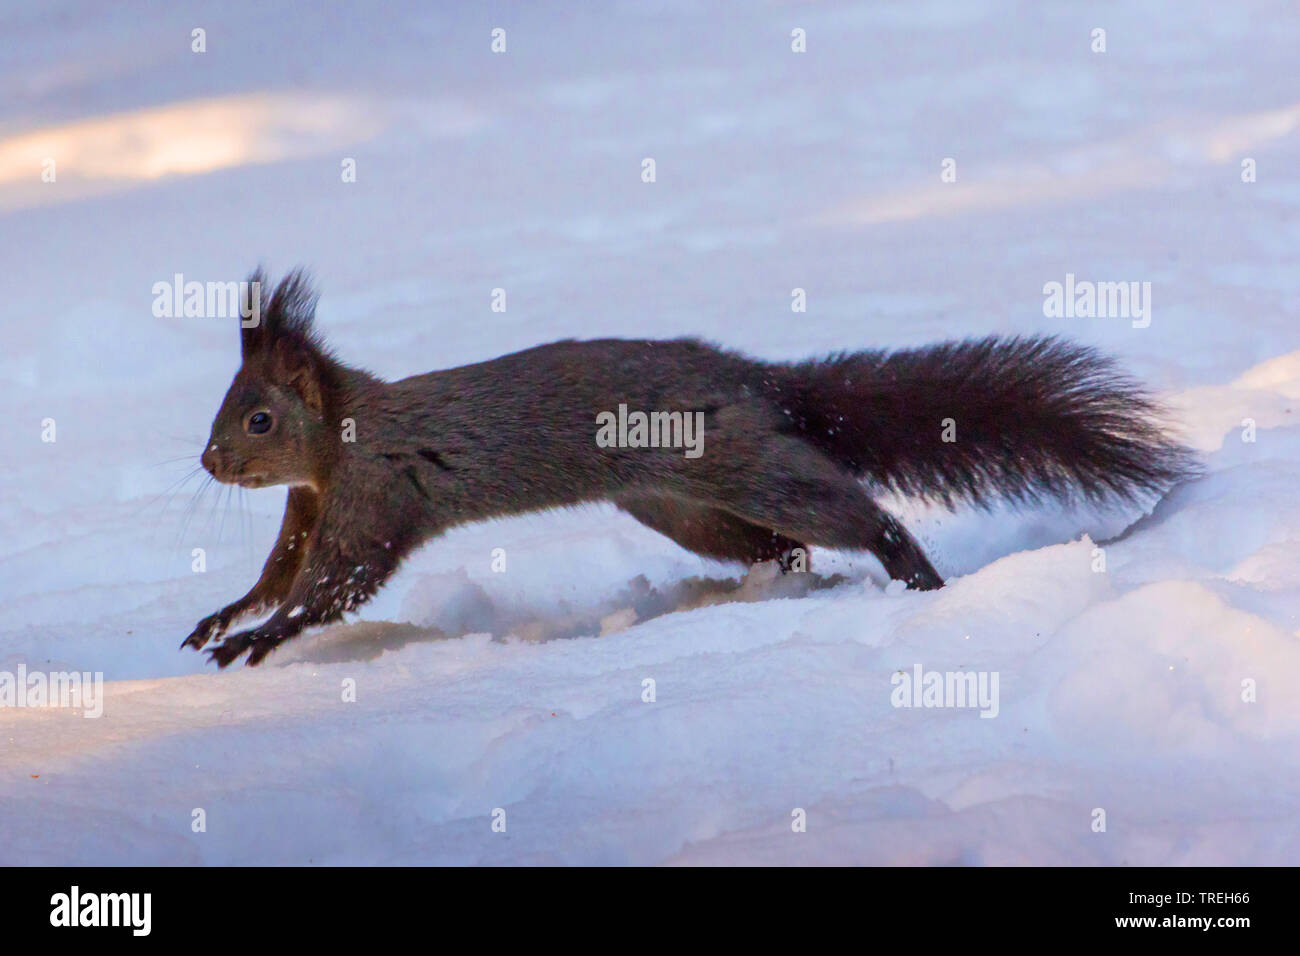 European red squirrel, Eurasian red squirrel (Sciurus vulgaris), jumping through the snow and searching for food, Switzerland, Grisons Stock Photo